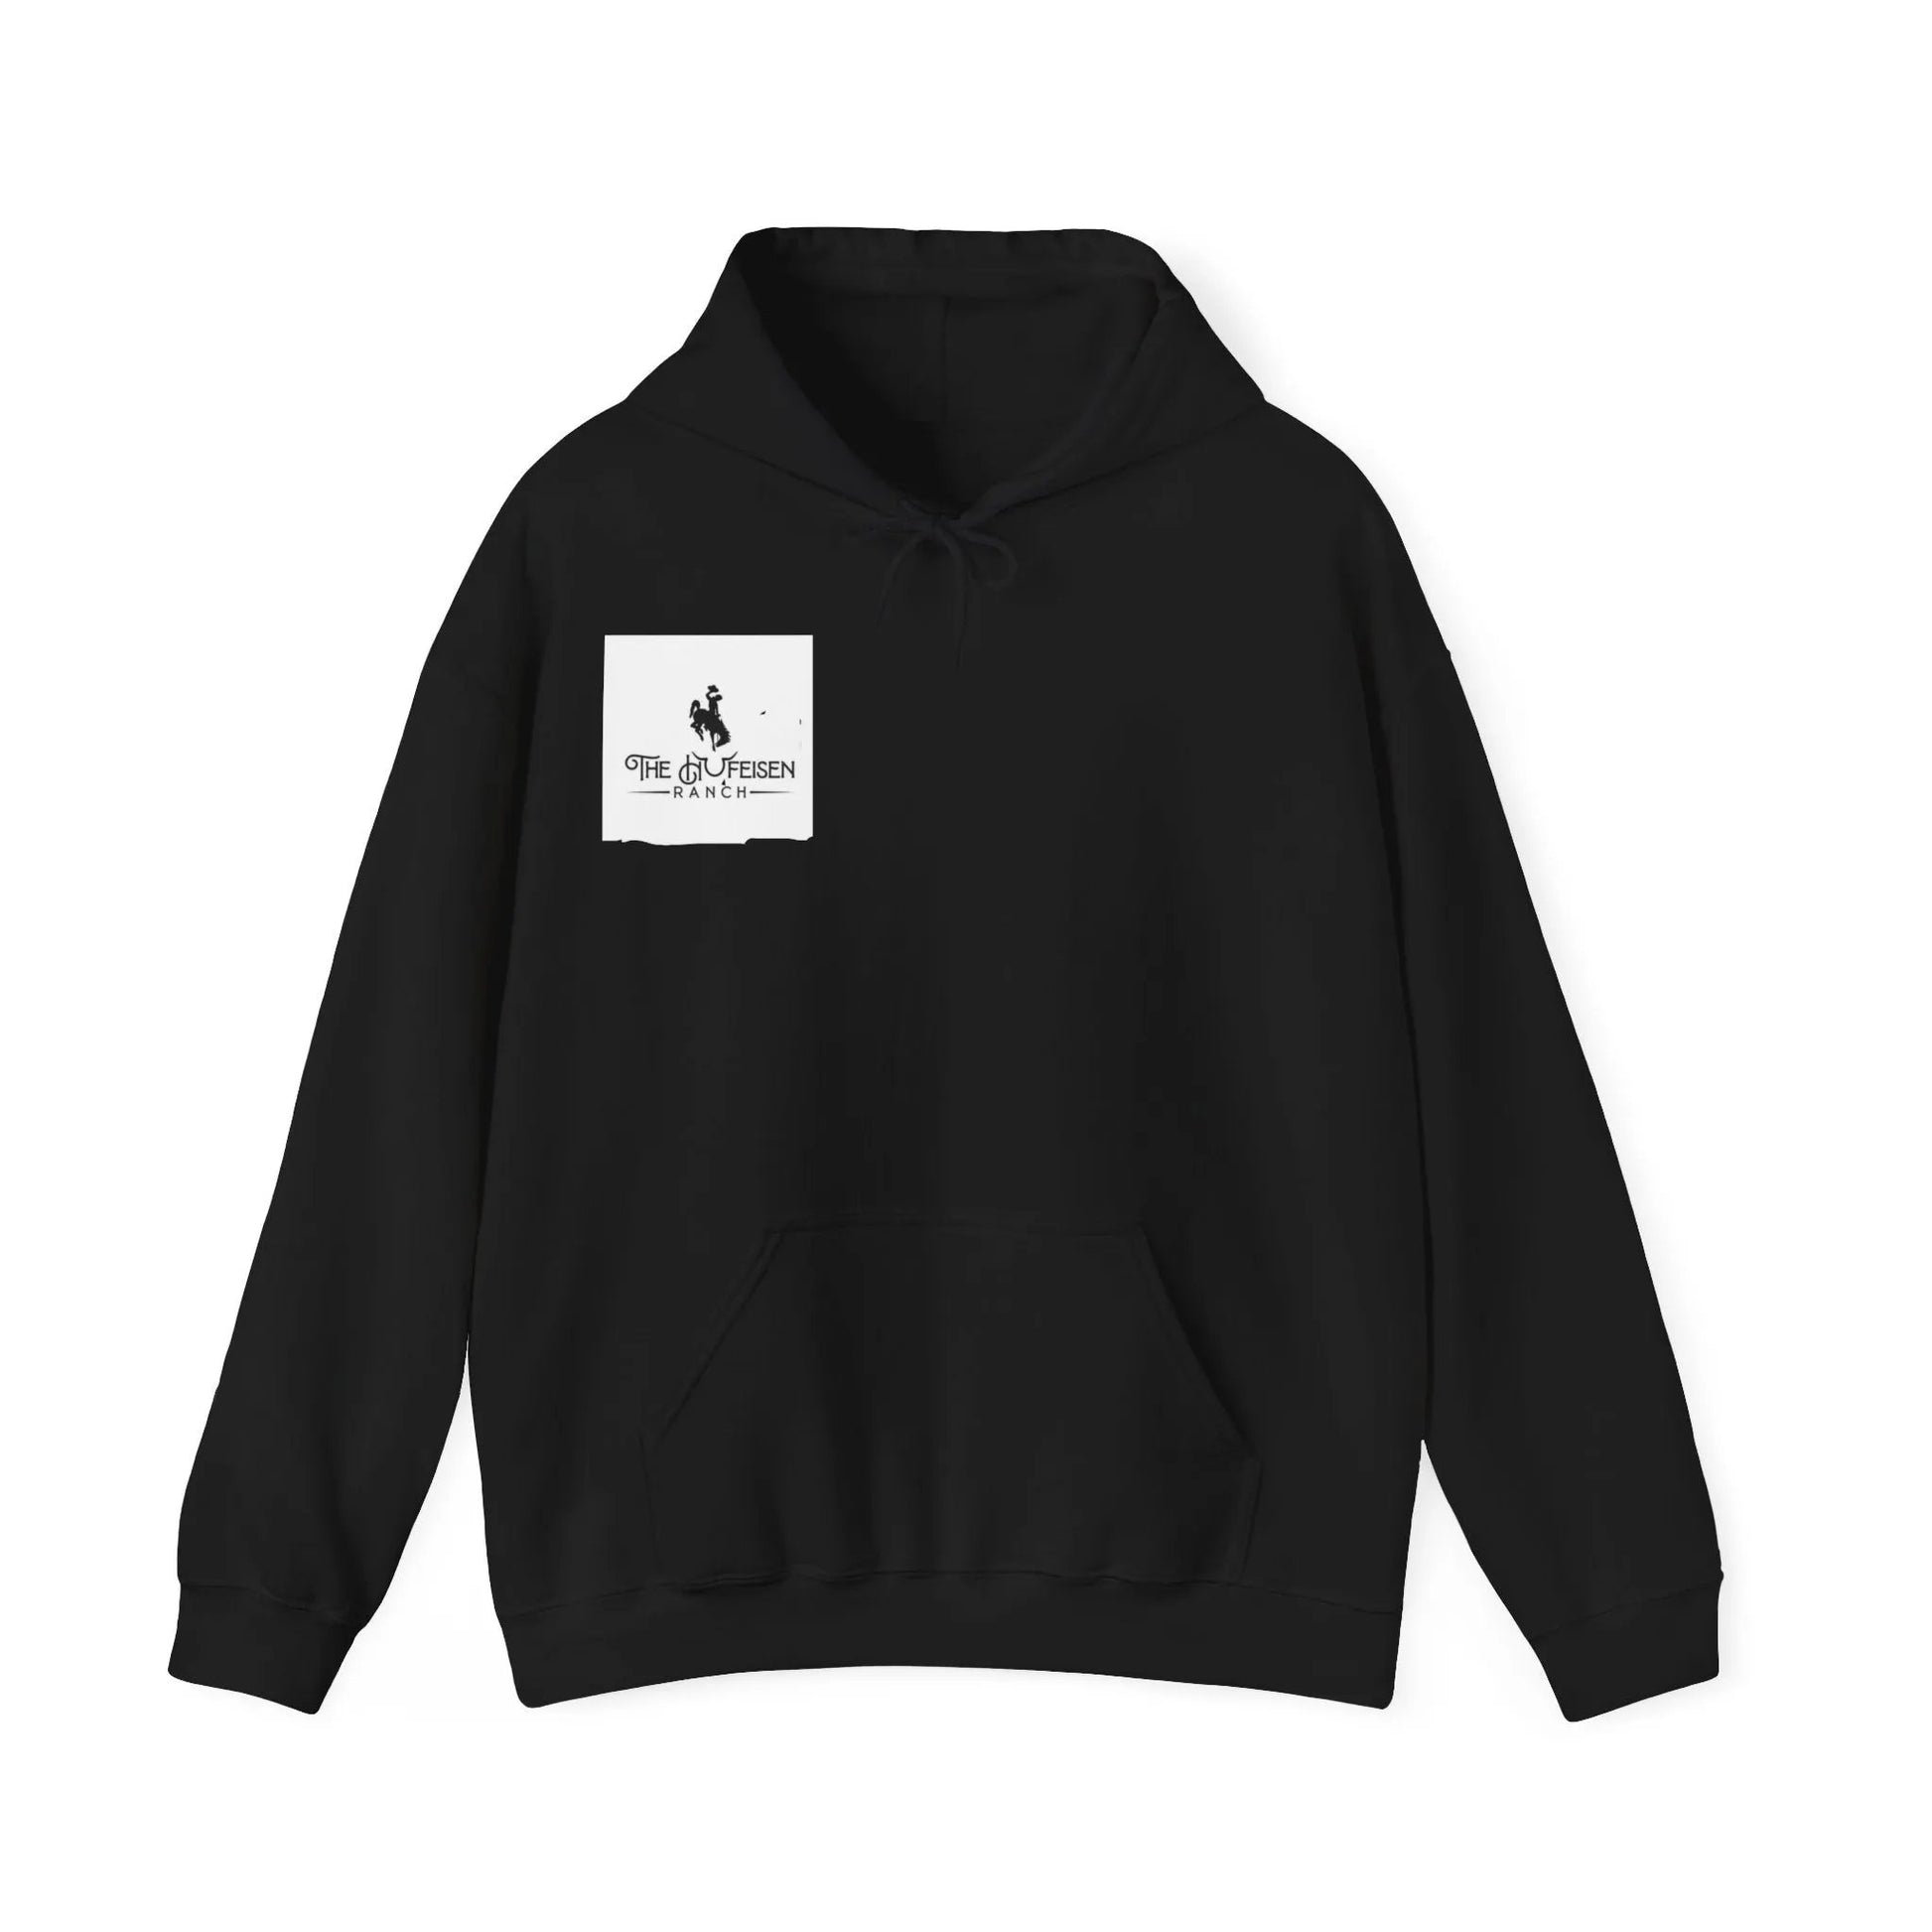 Unisex Heavy Blend™ Hooded SweatshirtThis unisex heavy blend hooded sweatshirt is relaxation itself. Made with a thick blend of cotton and polyester, it feels plush, soft and warm, a perfect choice for Unisex Heavy Blend™ Hooded SweatshirtThe Hufeisen-Ranch (WYO Wagyu)Hoodie